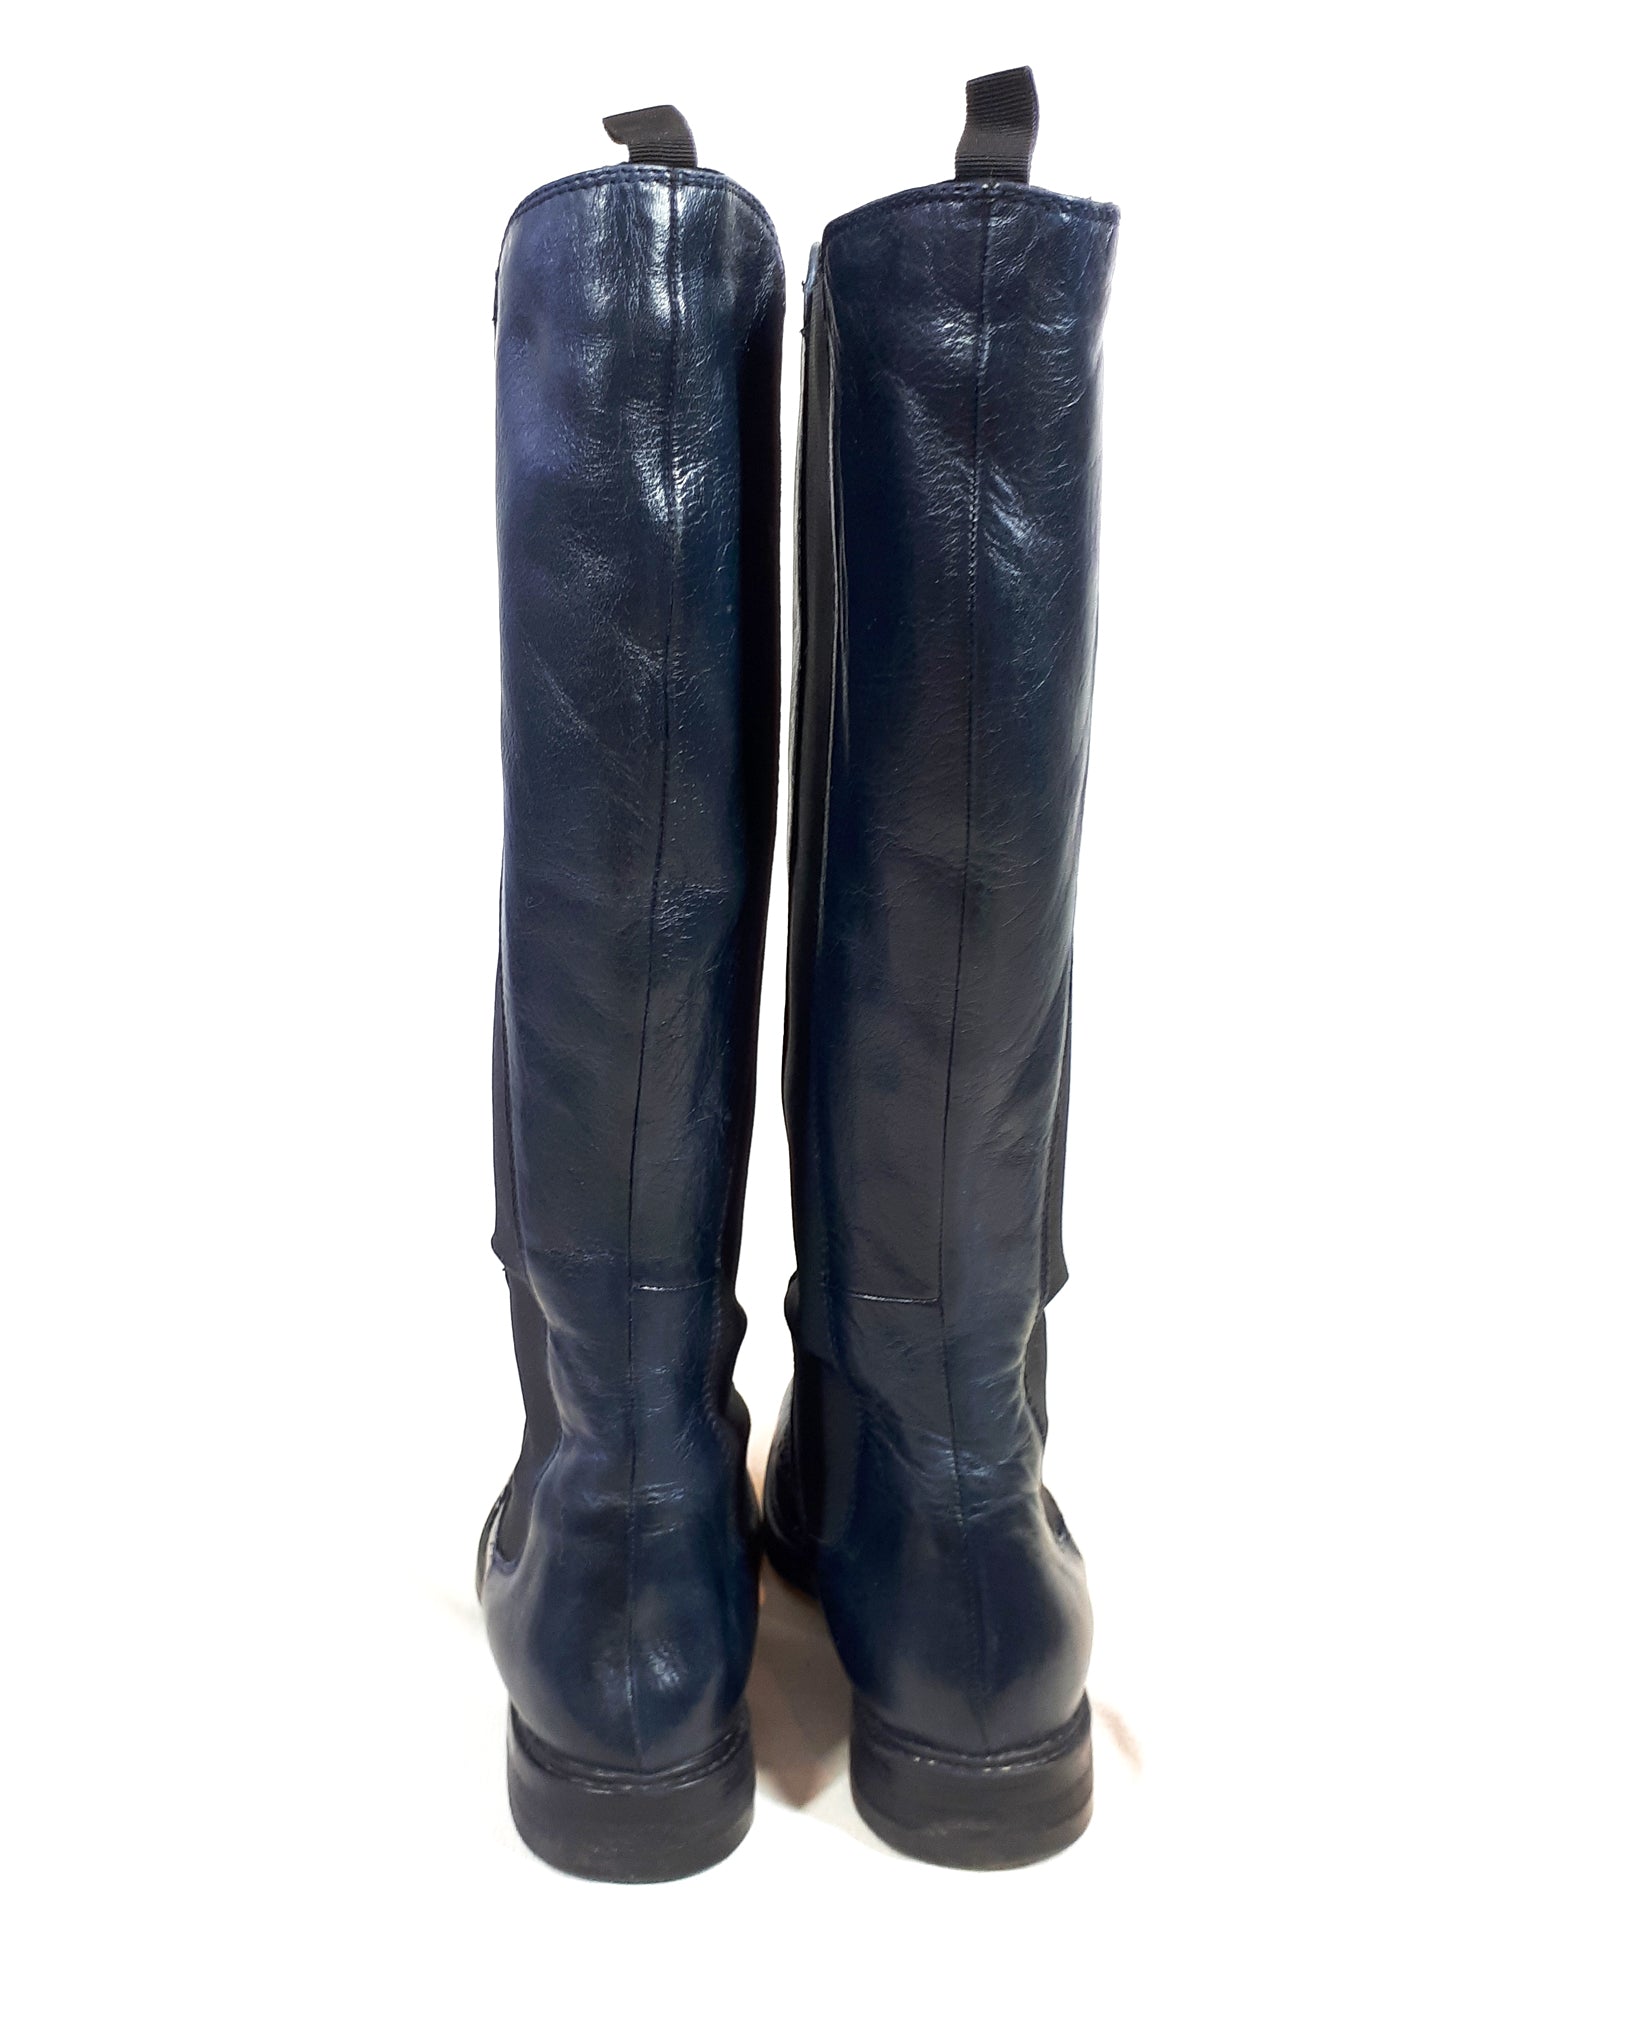 Vintage Tall Leather Navy Riding Boots with Elastic Sides and Derby Style Detailing